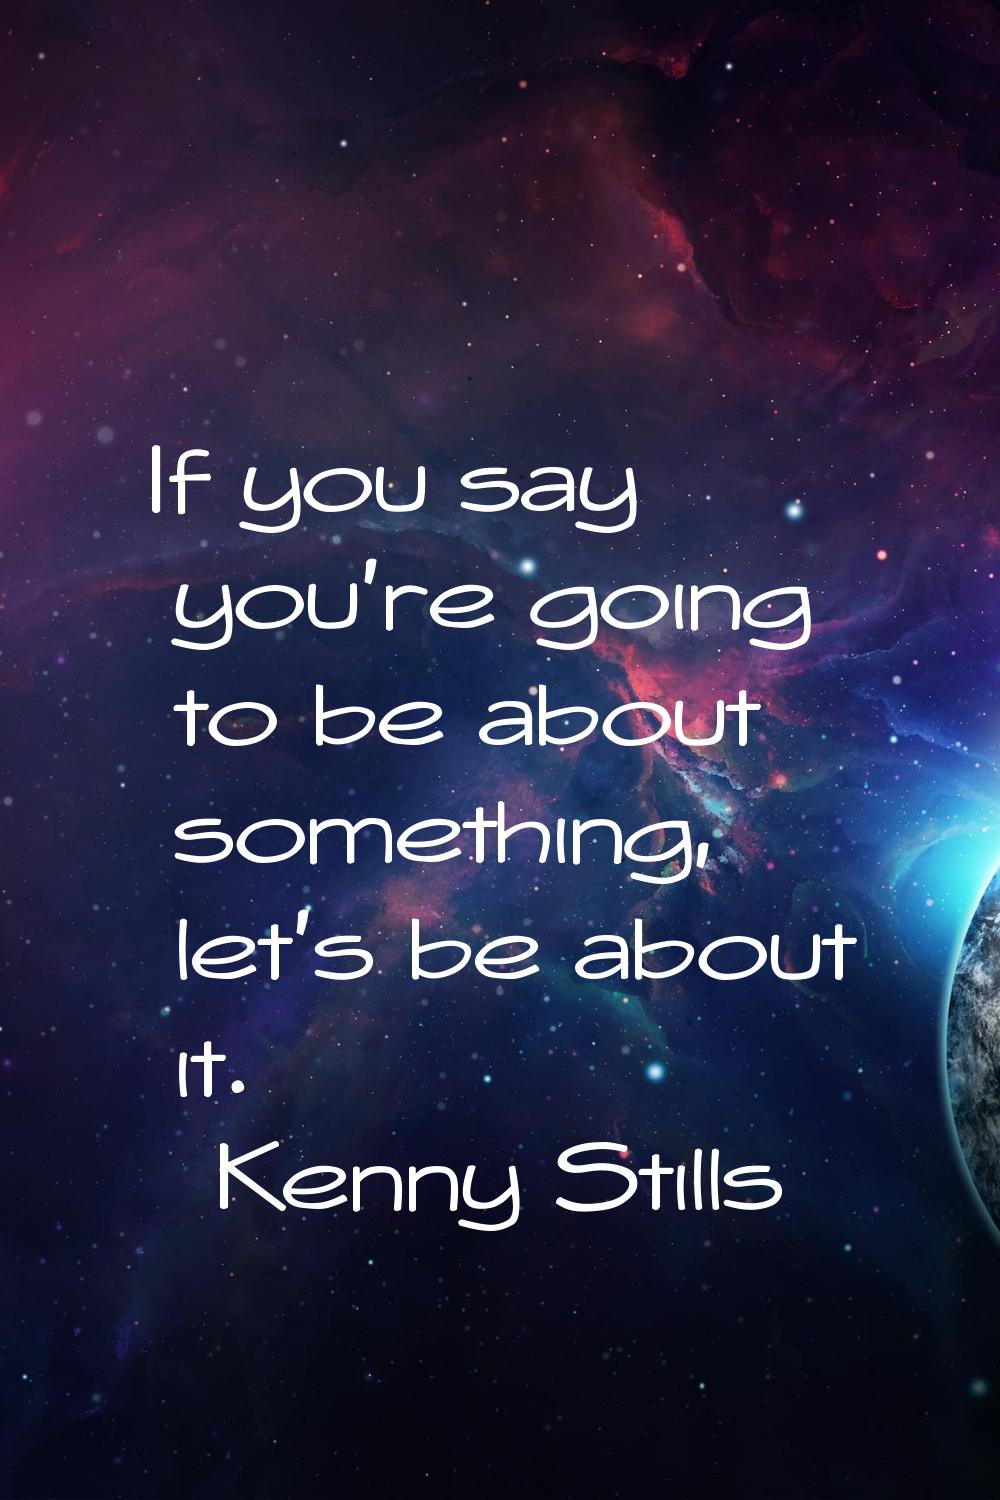 If you say you're going to be about something, let's be about it.